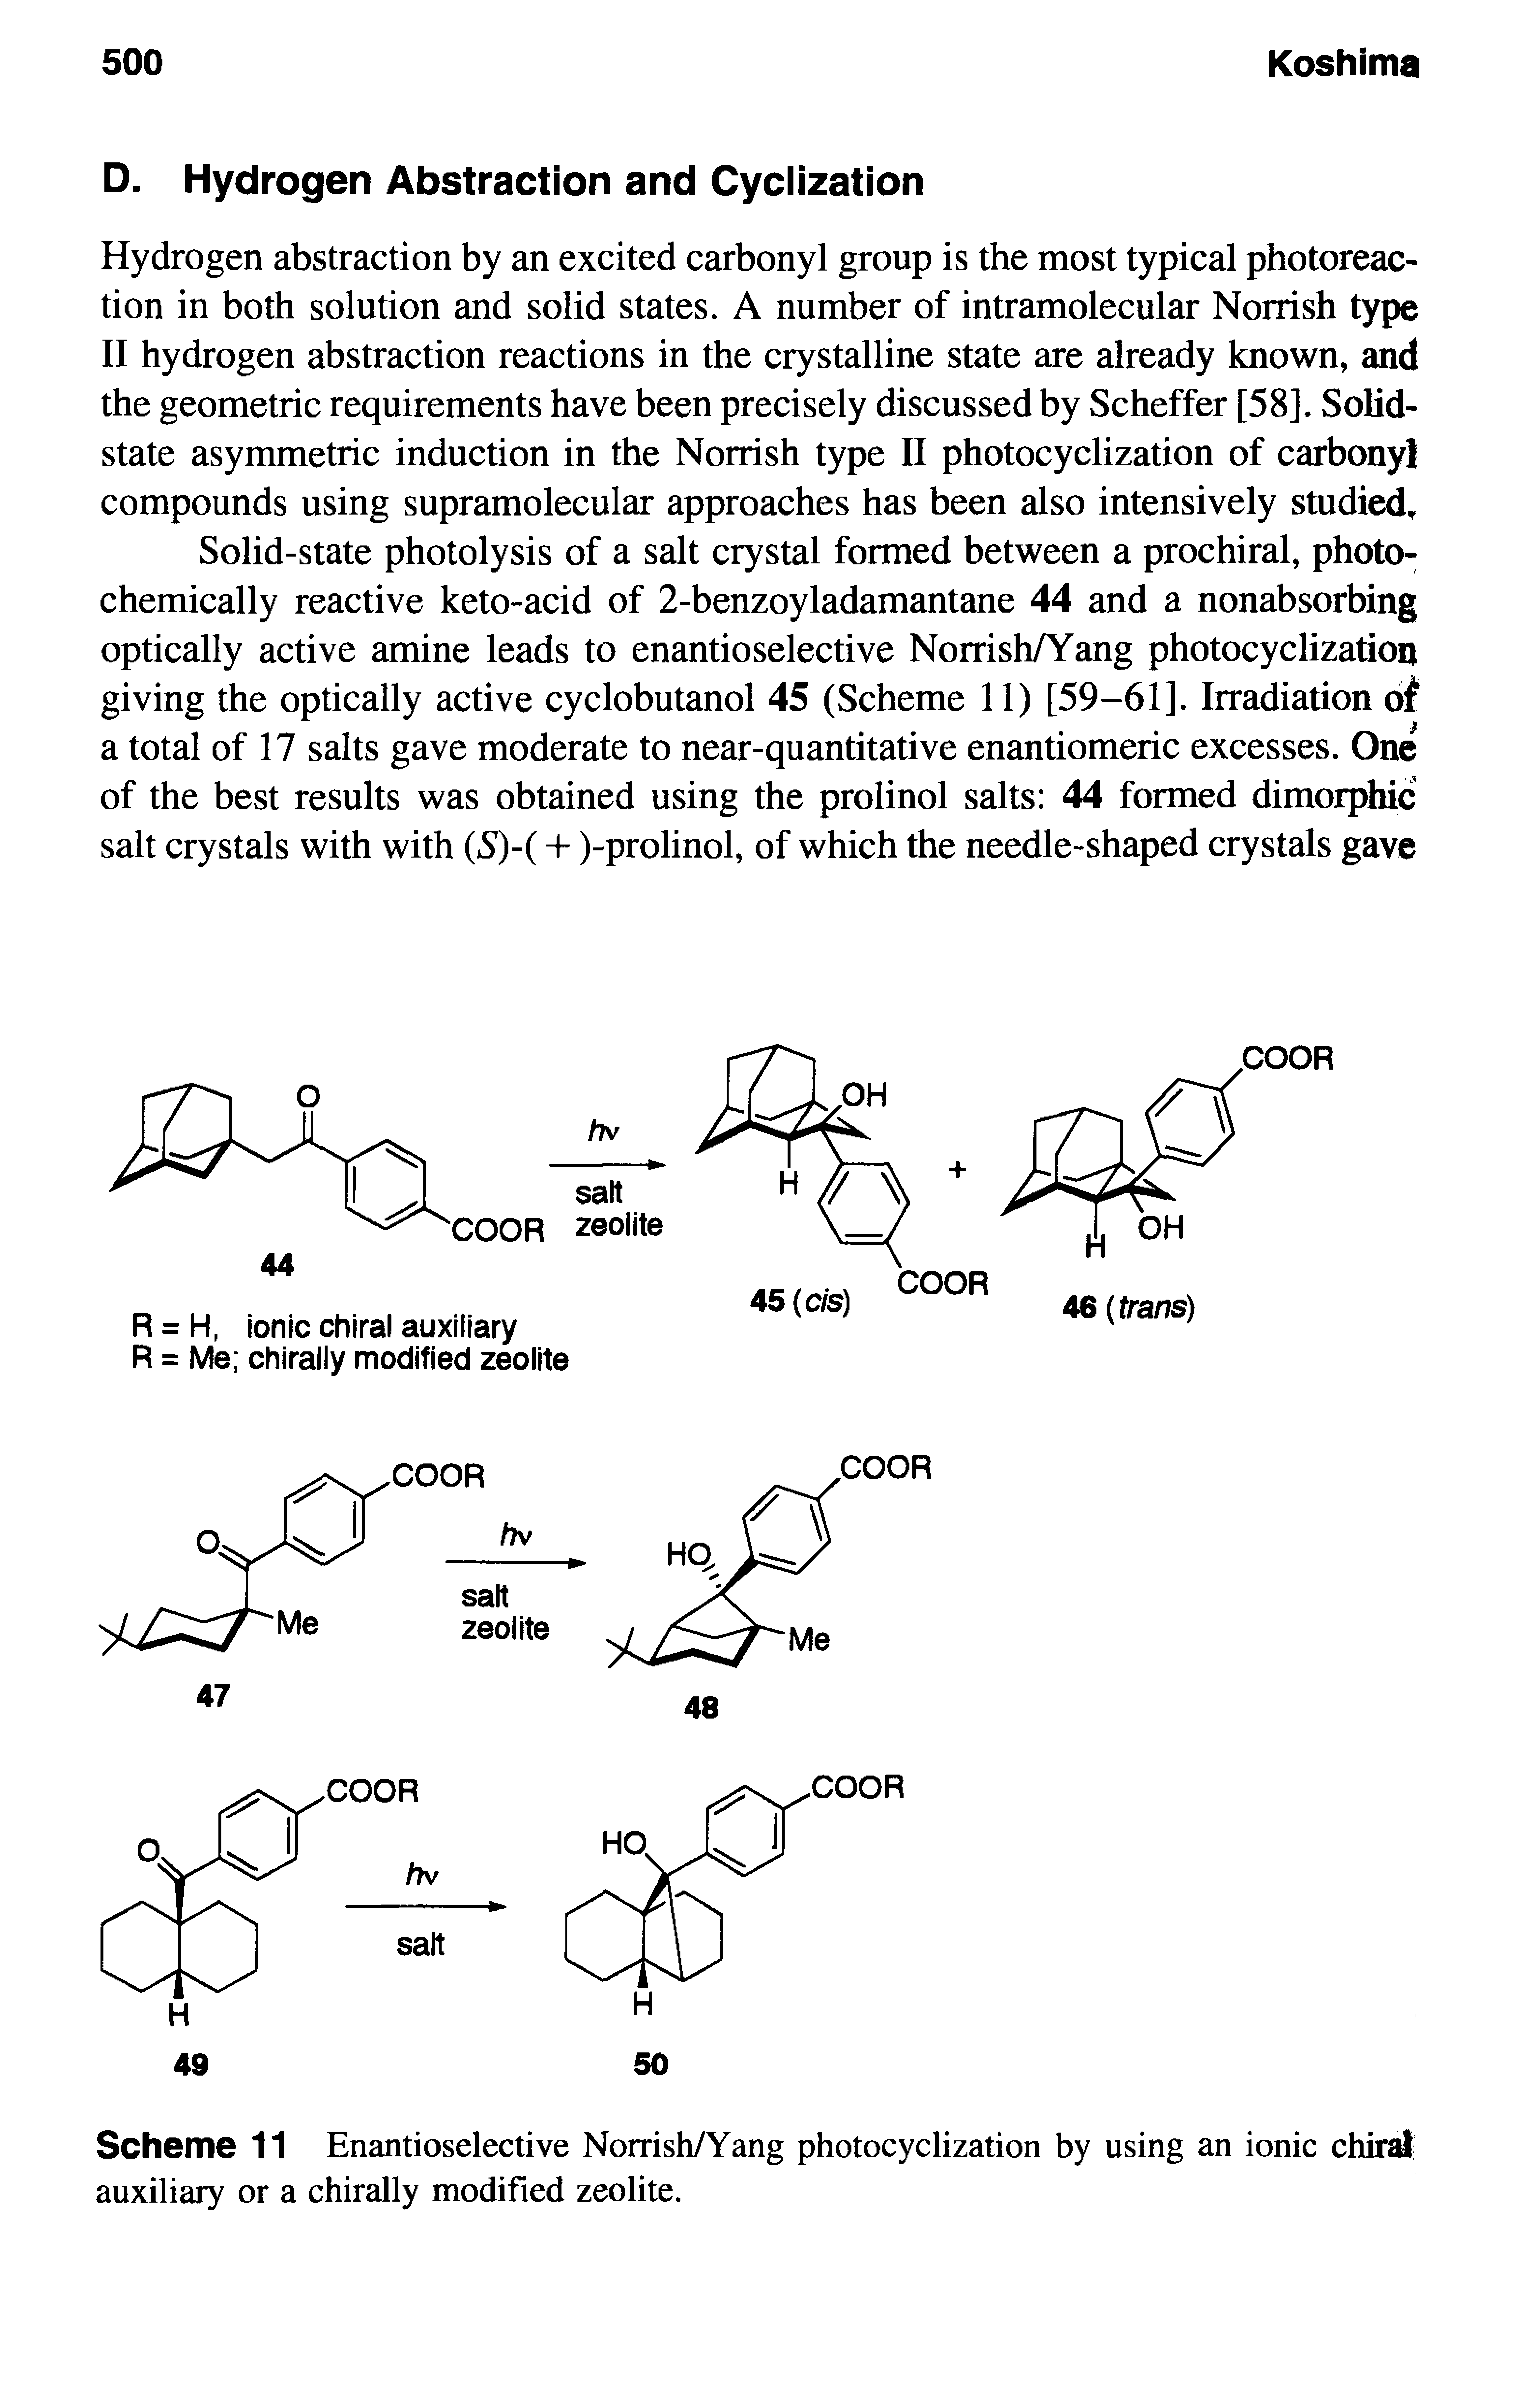 Scheme 11 Enantioselective Norrish/Yang photocyclization by using an ionic chiral auxiliary or a chiraliy modified zeolite.